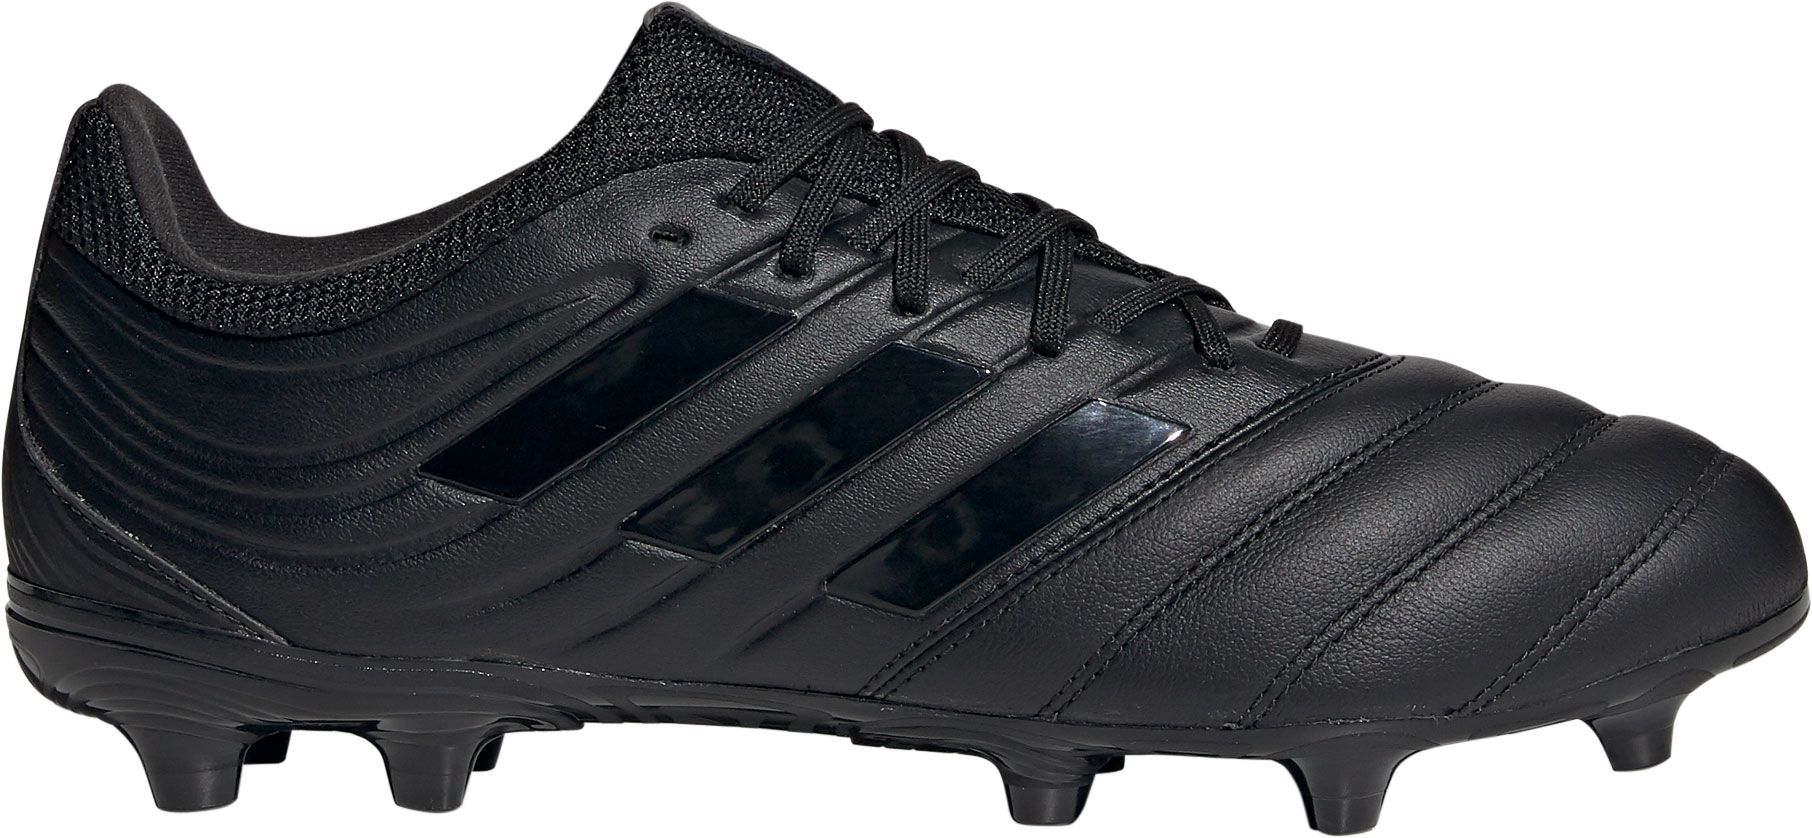 soccer cleats adidas copa